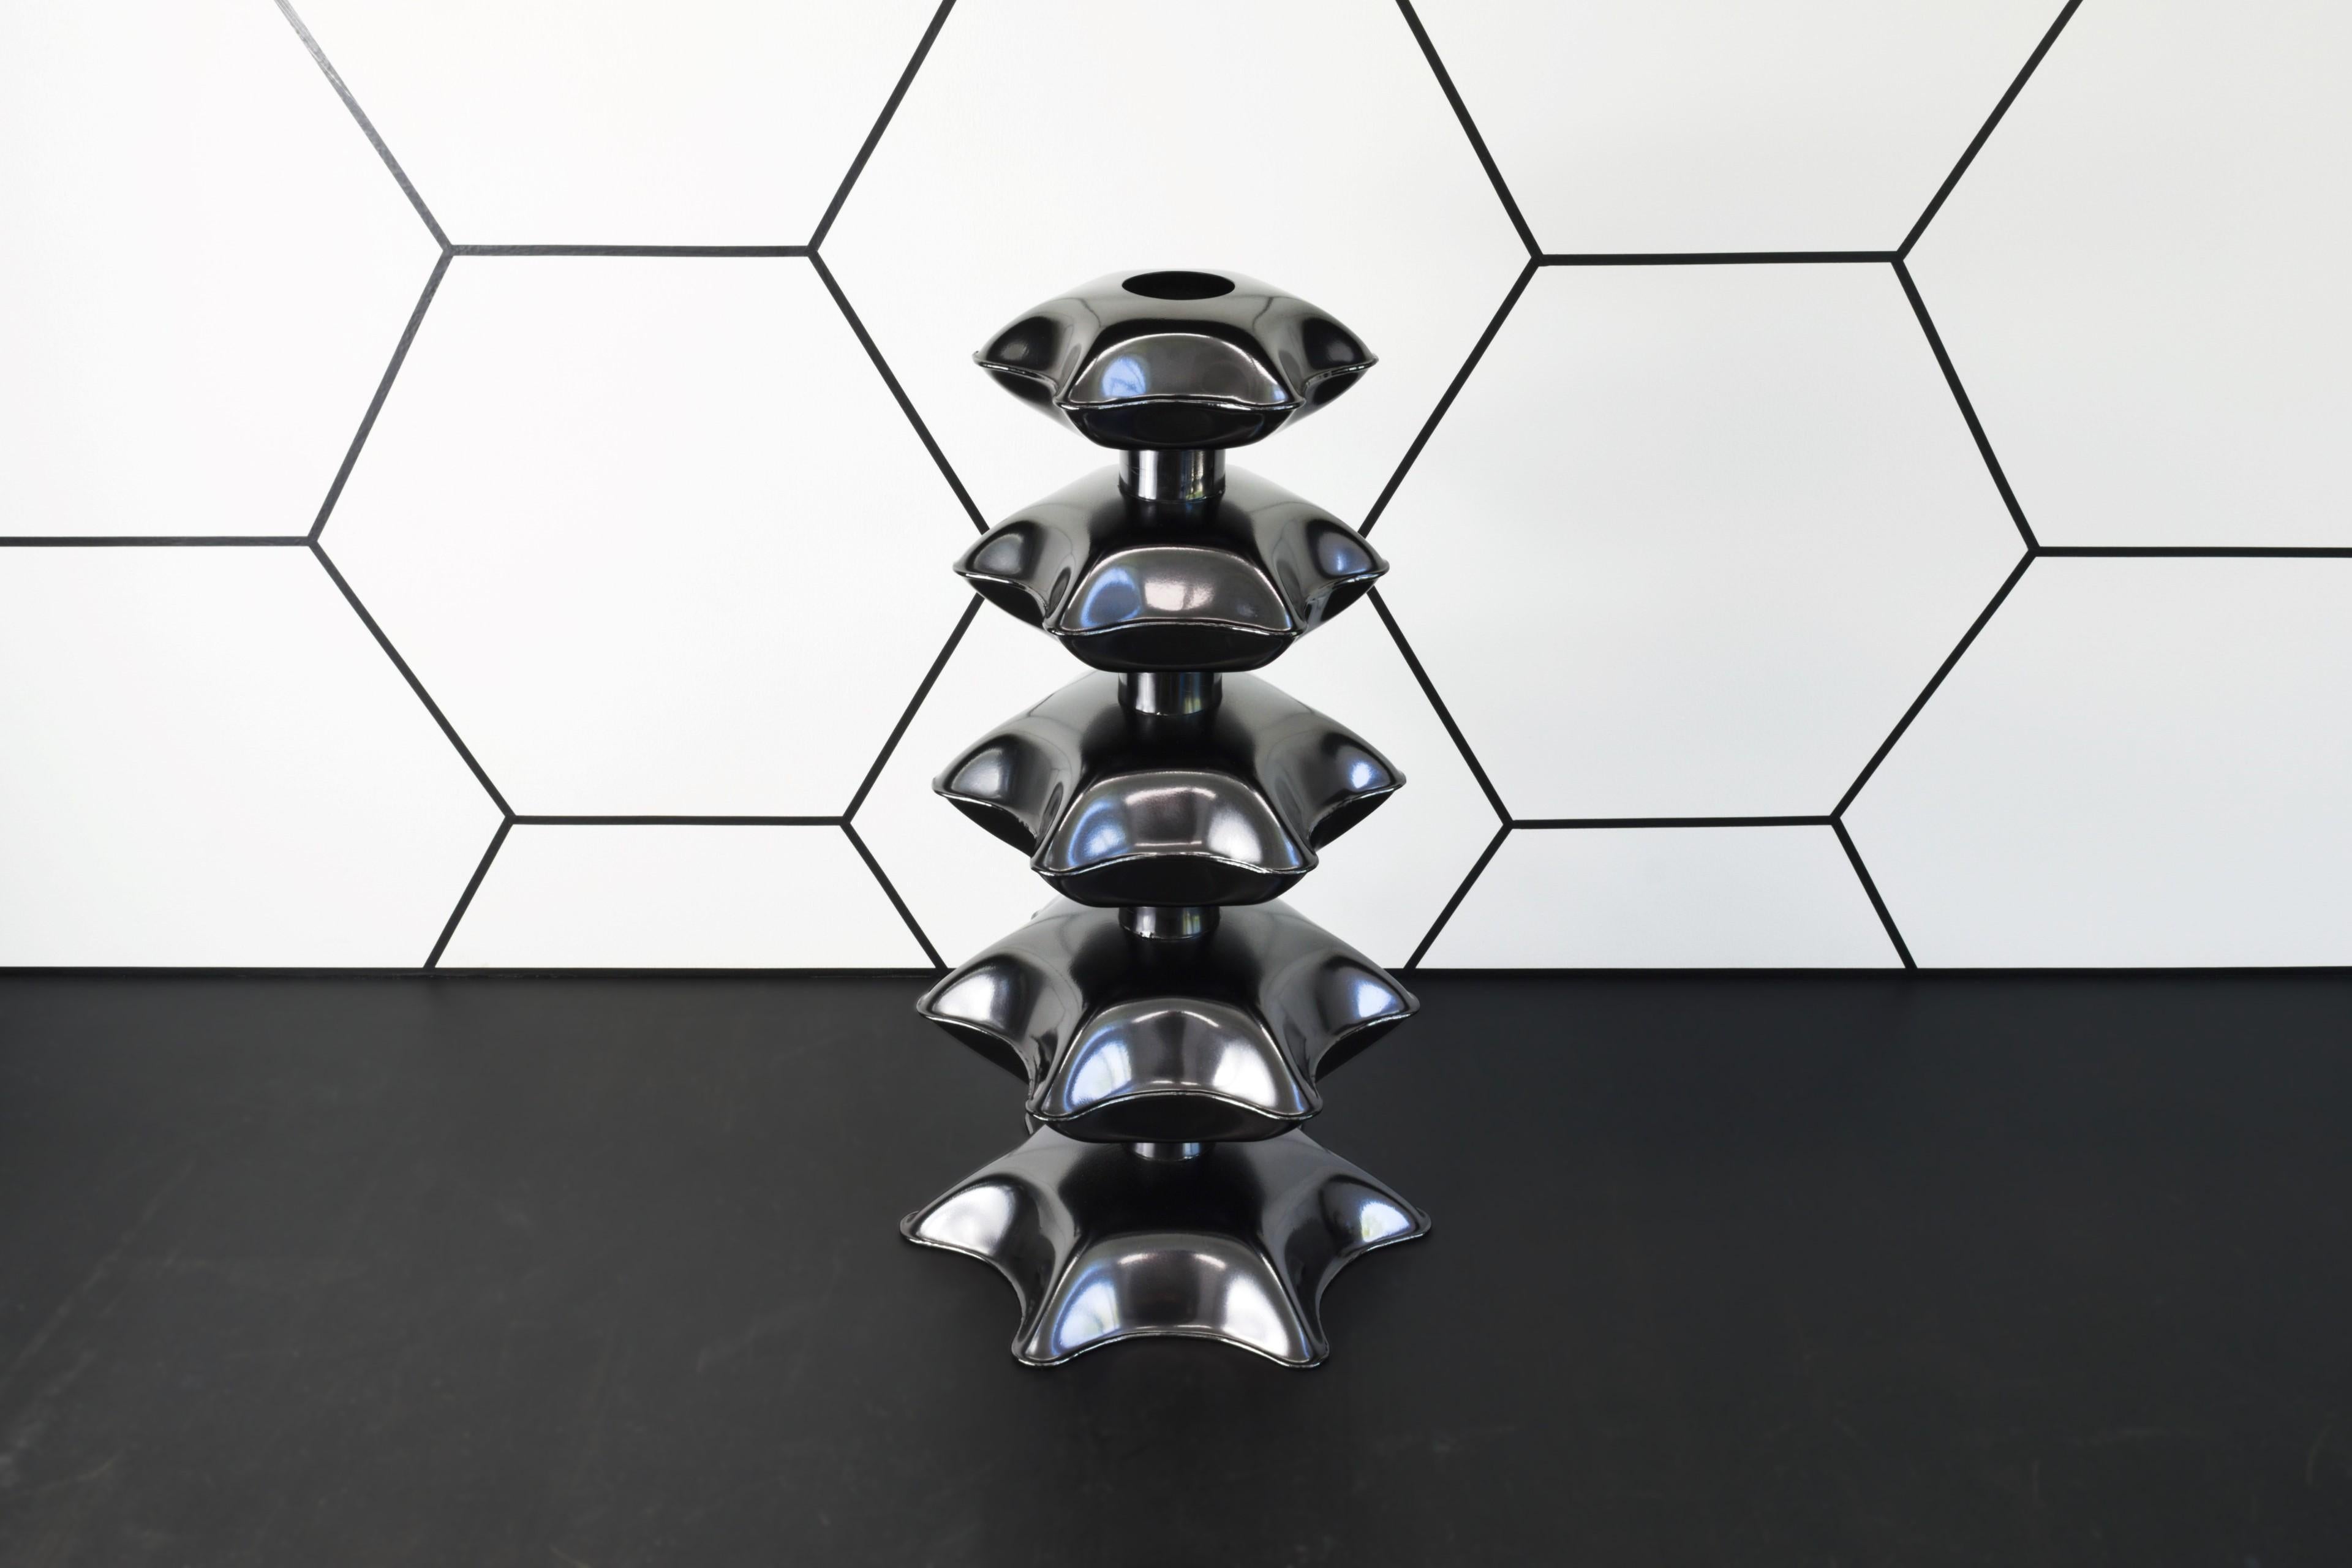 Reminiscent of architecture from the far east, the Pagoda vase developed from experiments with inflating steel, and an ongoing desire to discover exciting new forms with the process.

?To create the piece, pairs of flat hexagonal sheets are welded